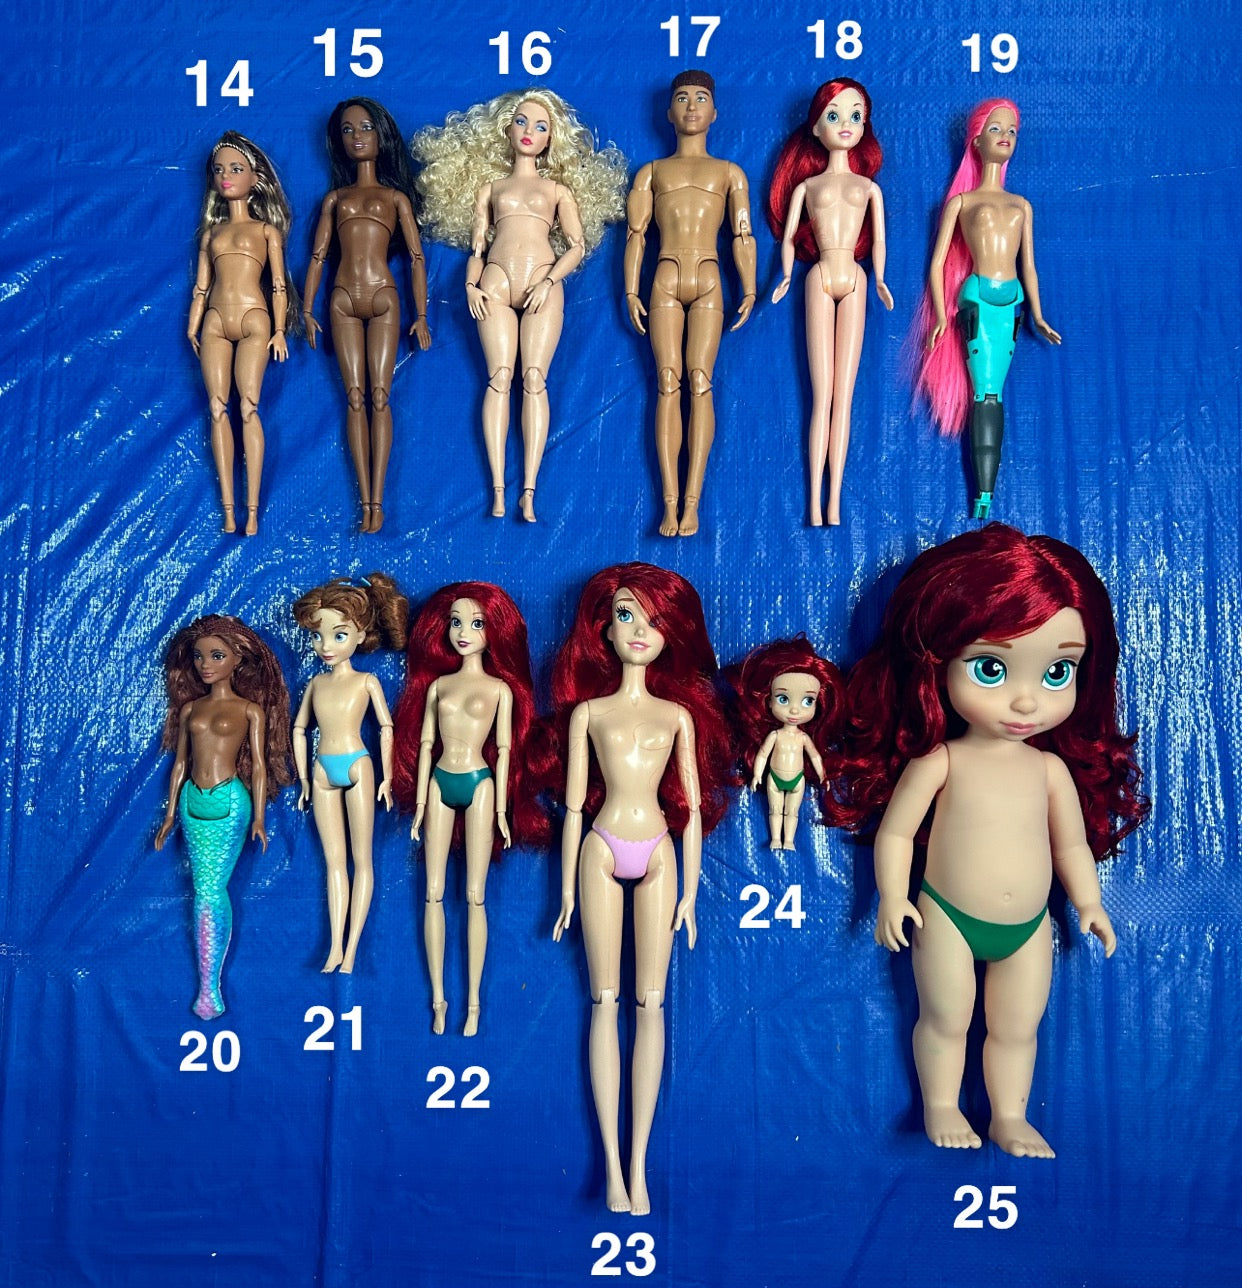 Cameron silicone mermaid tail for doll (doll not included)